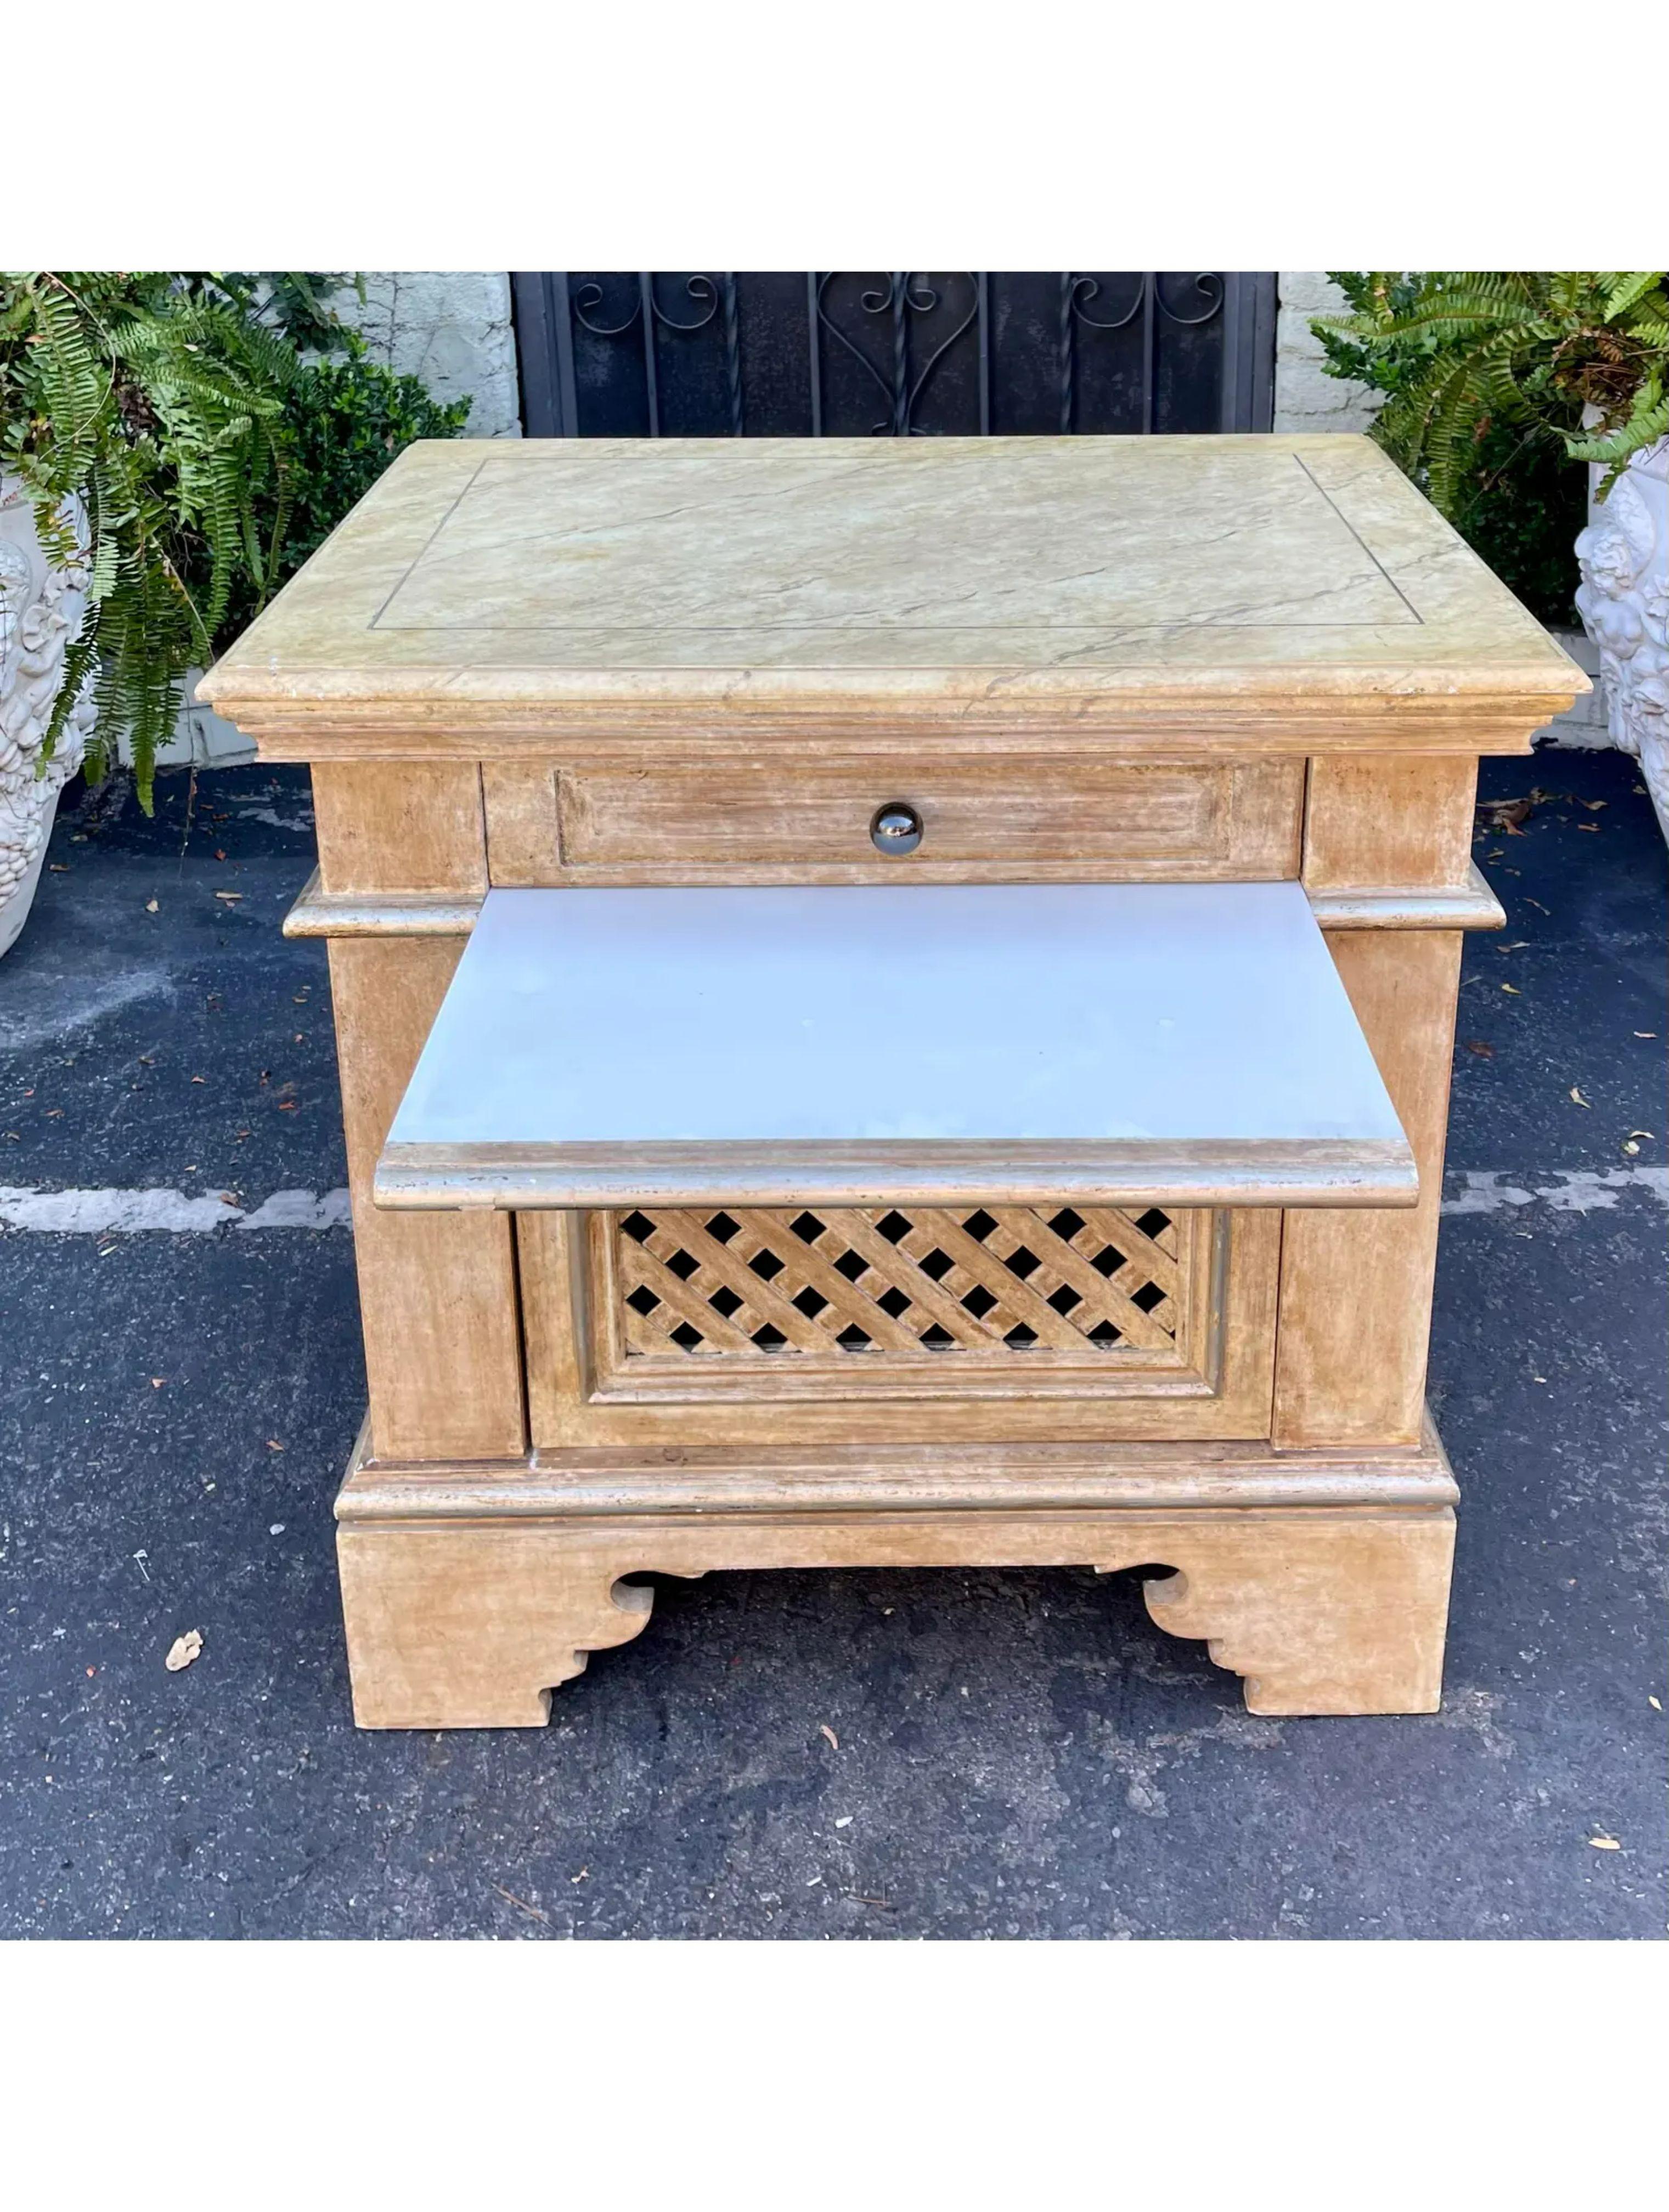 Minton-Spidell Italian Country Tuscany Style Side Table Nightstand Cabinet. It features a trompe l'oeil painted faux marble top, a single drawer, a platformier, and a fret work door.

Additional information: 
Materials: Paint, Wood
Color: